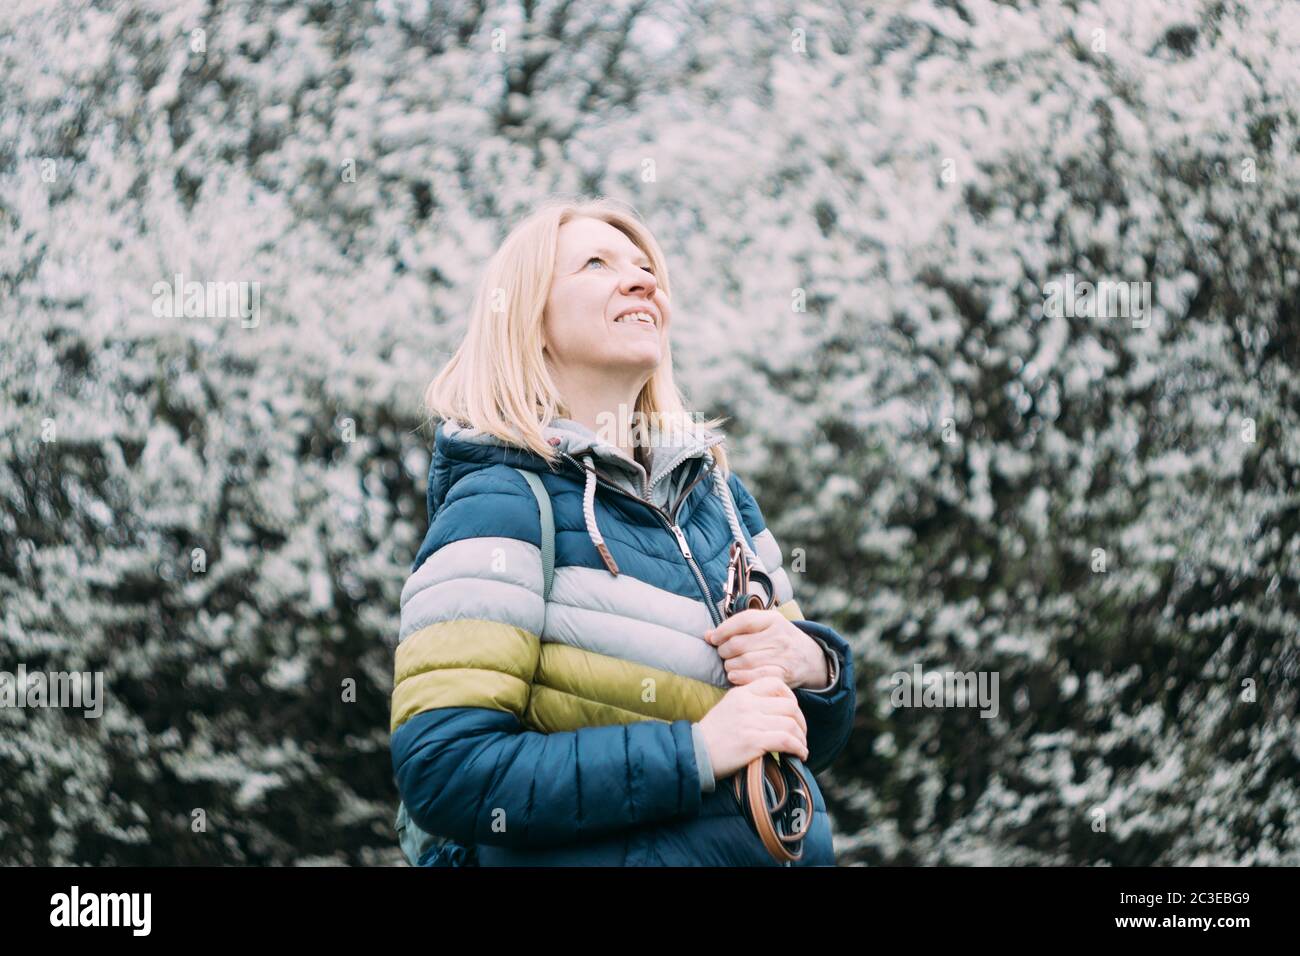 Authentic smiling blonde woman. Retro analog vintage swirley bokeh film look. Real middle aged peopl Stock Photo